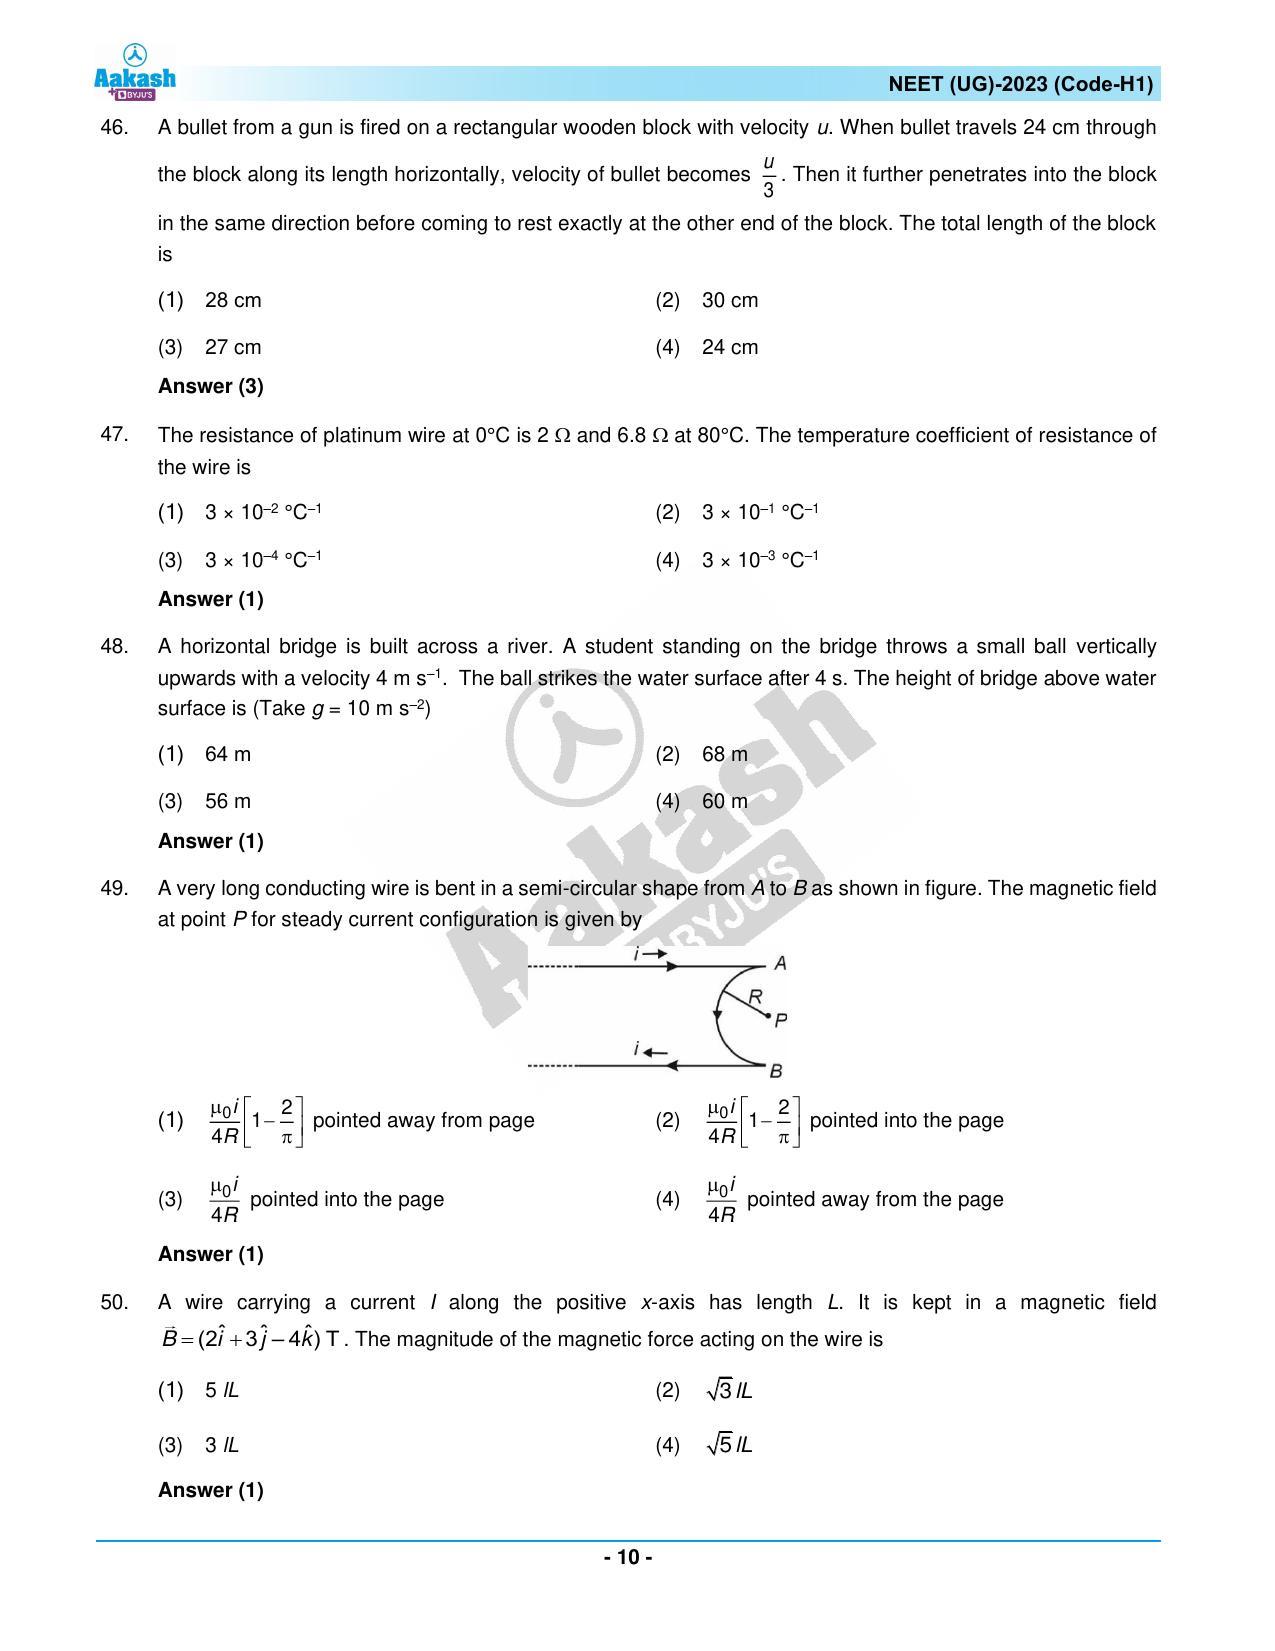 NEET 2023 Question Paper H1 - Page 10